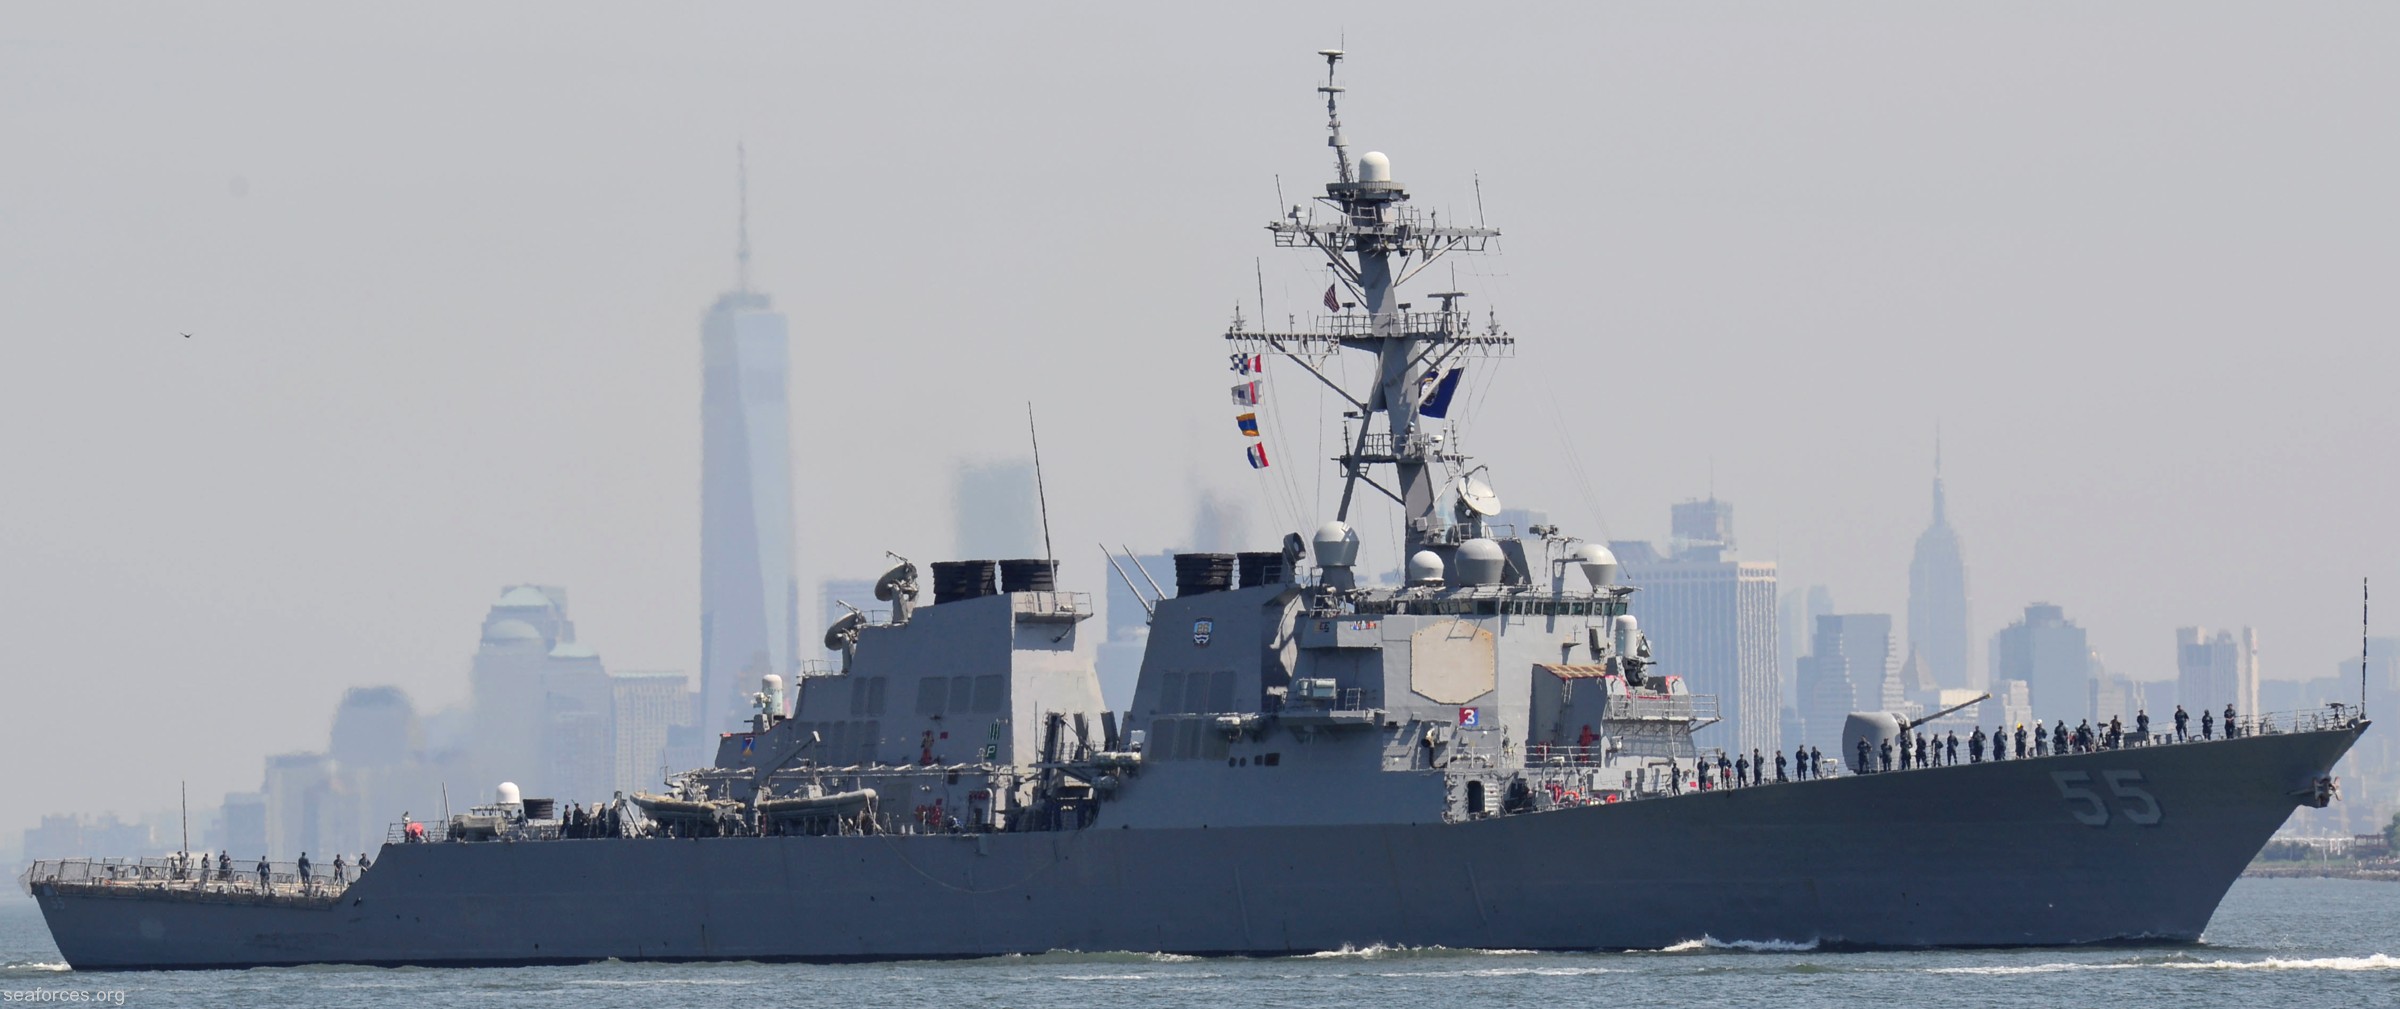 ddg-55 uss stout guided missile destroyer us navy 21 new york